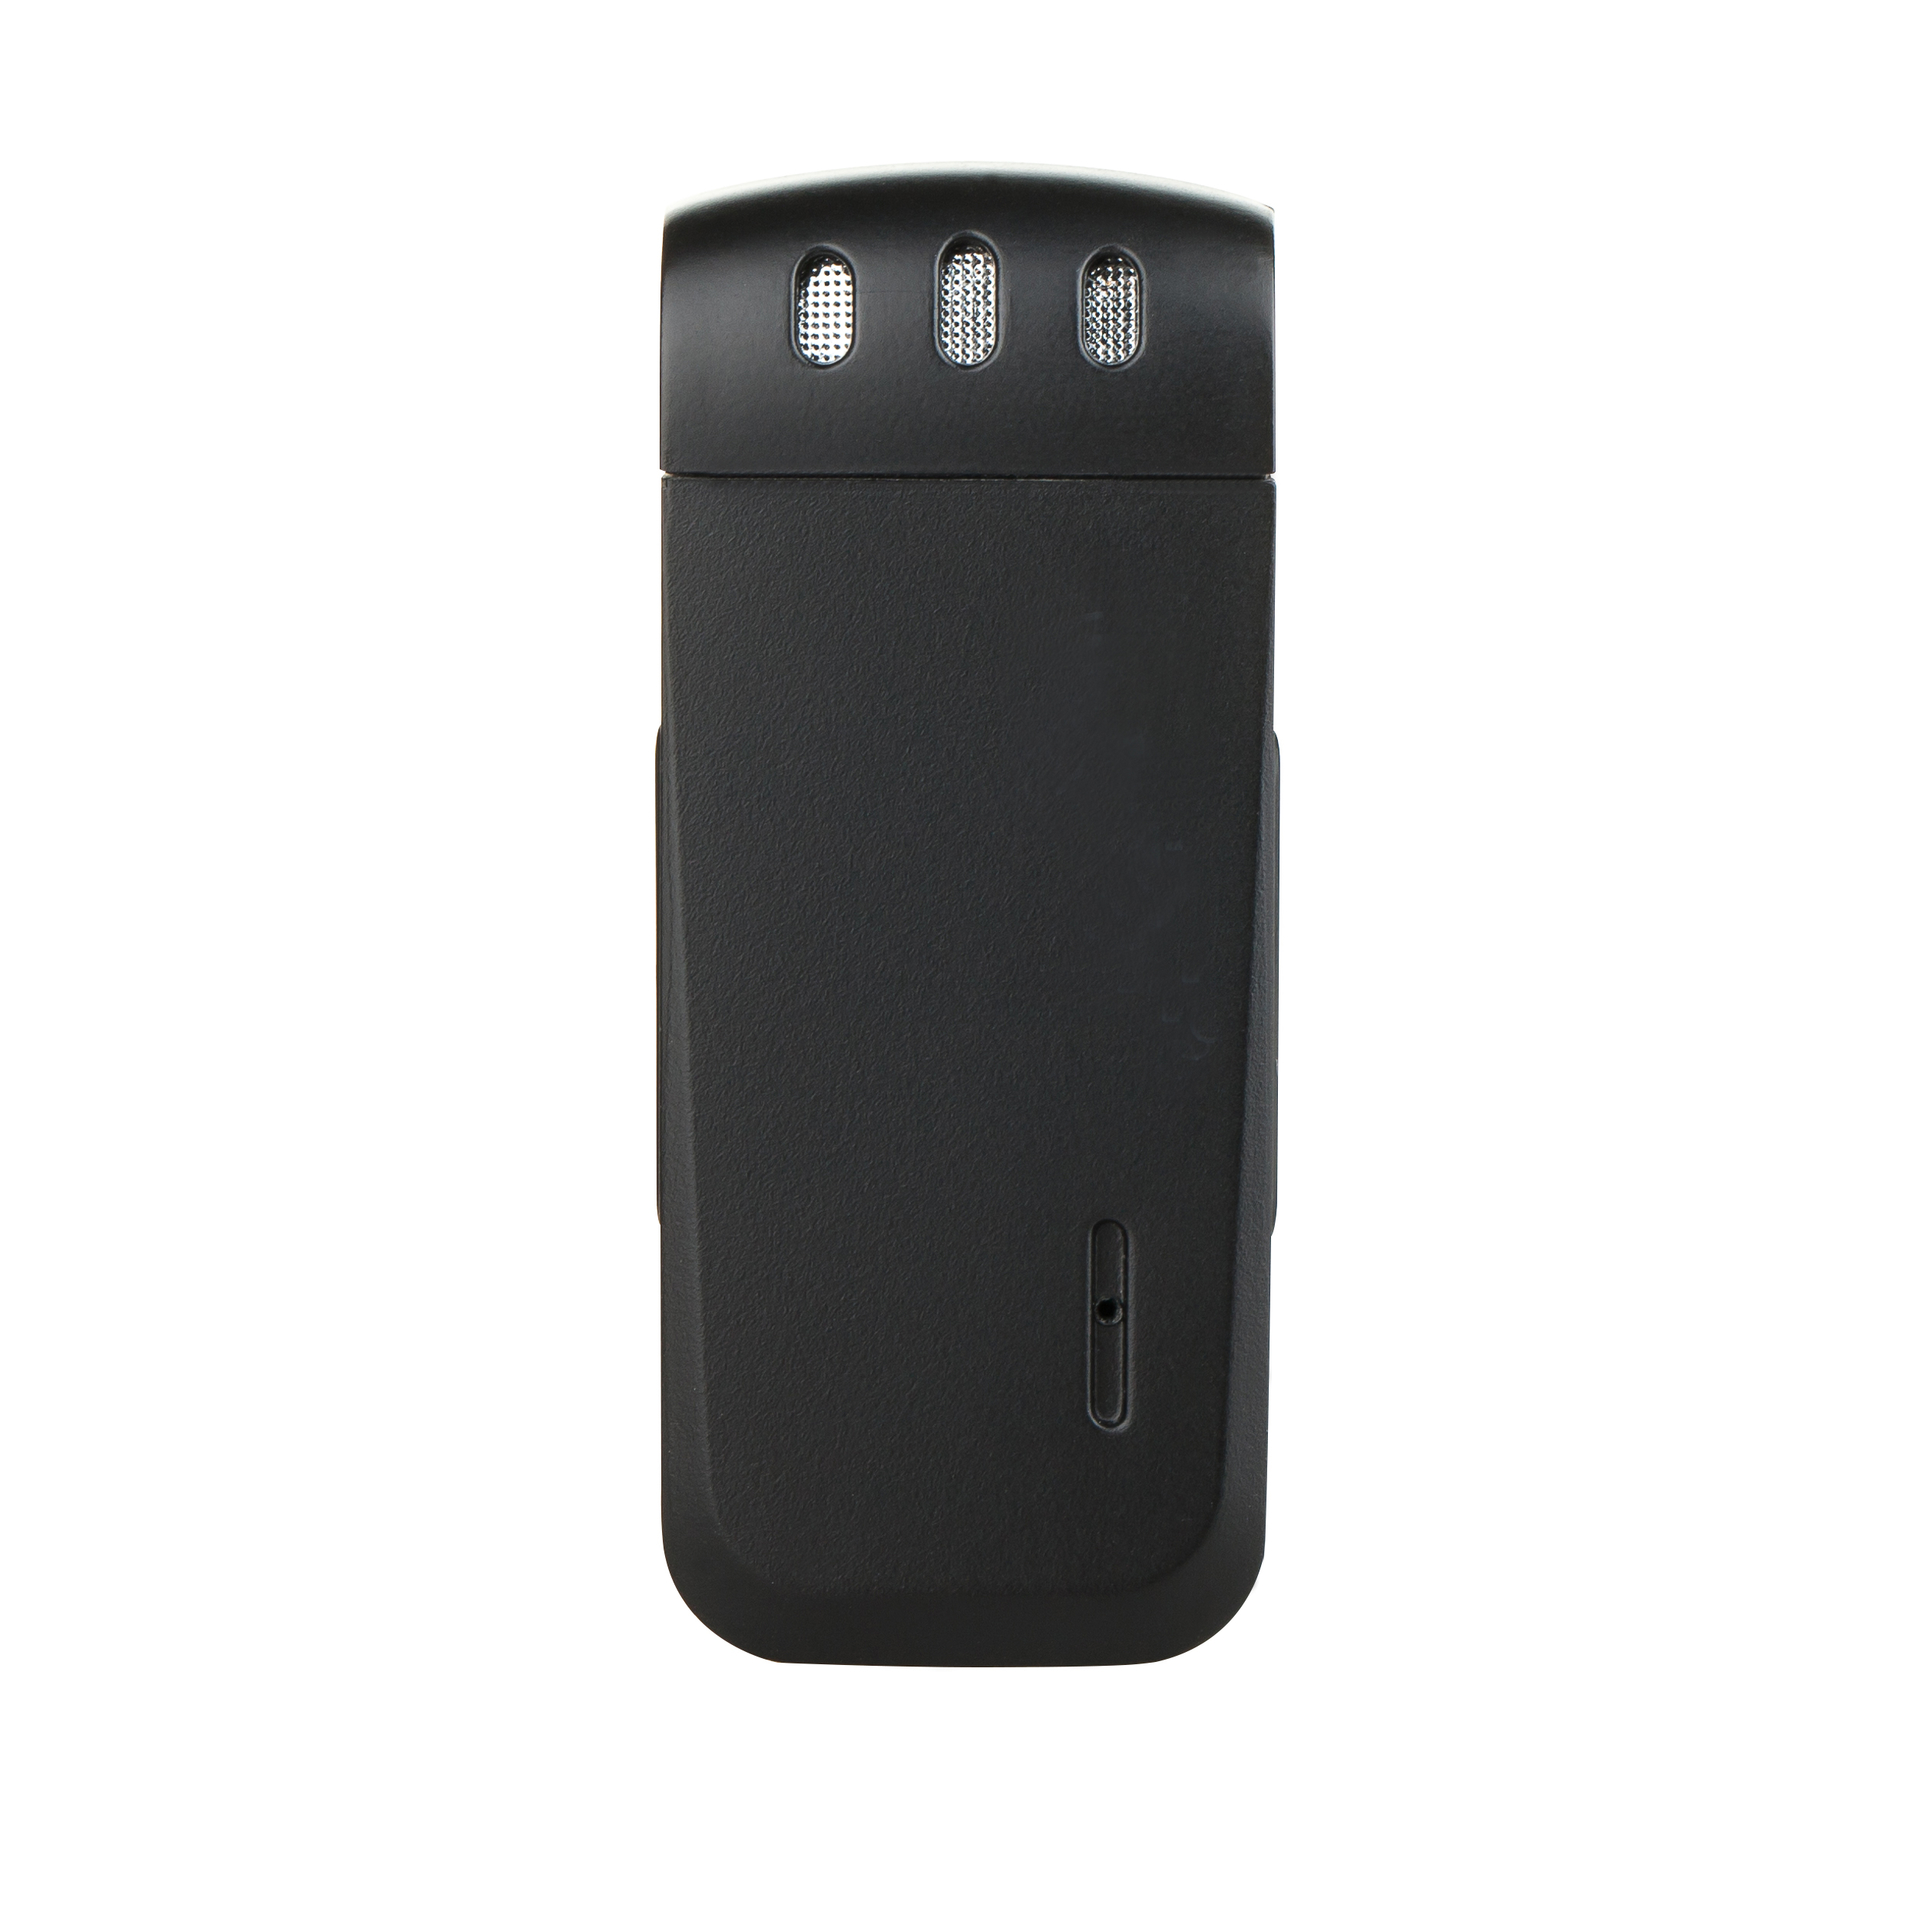 the fashionable secret voice recorder the toy digital voice recorder with clip WR-16